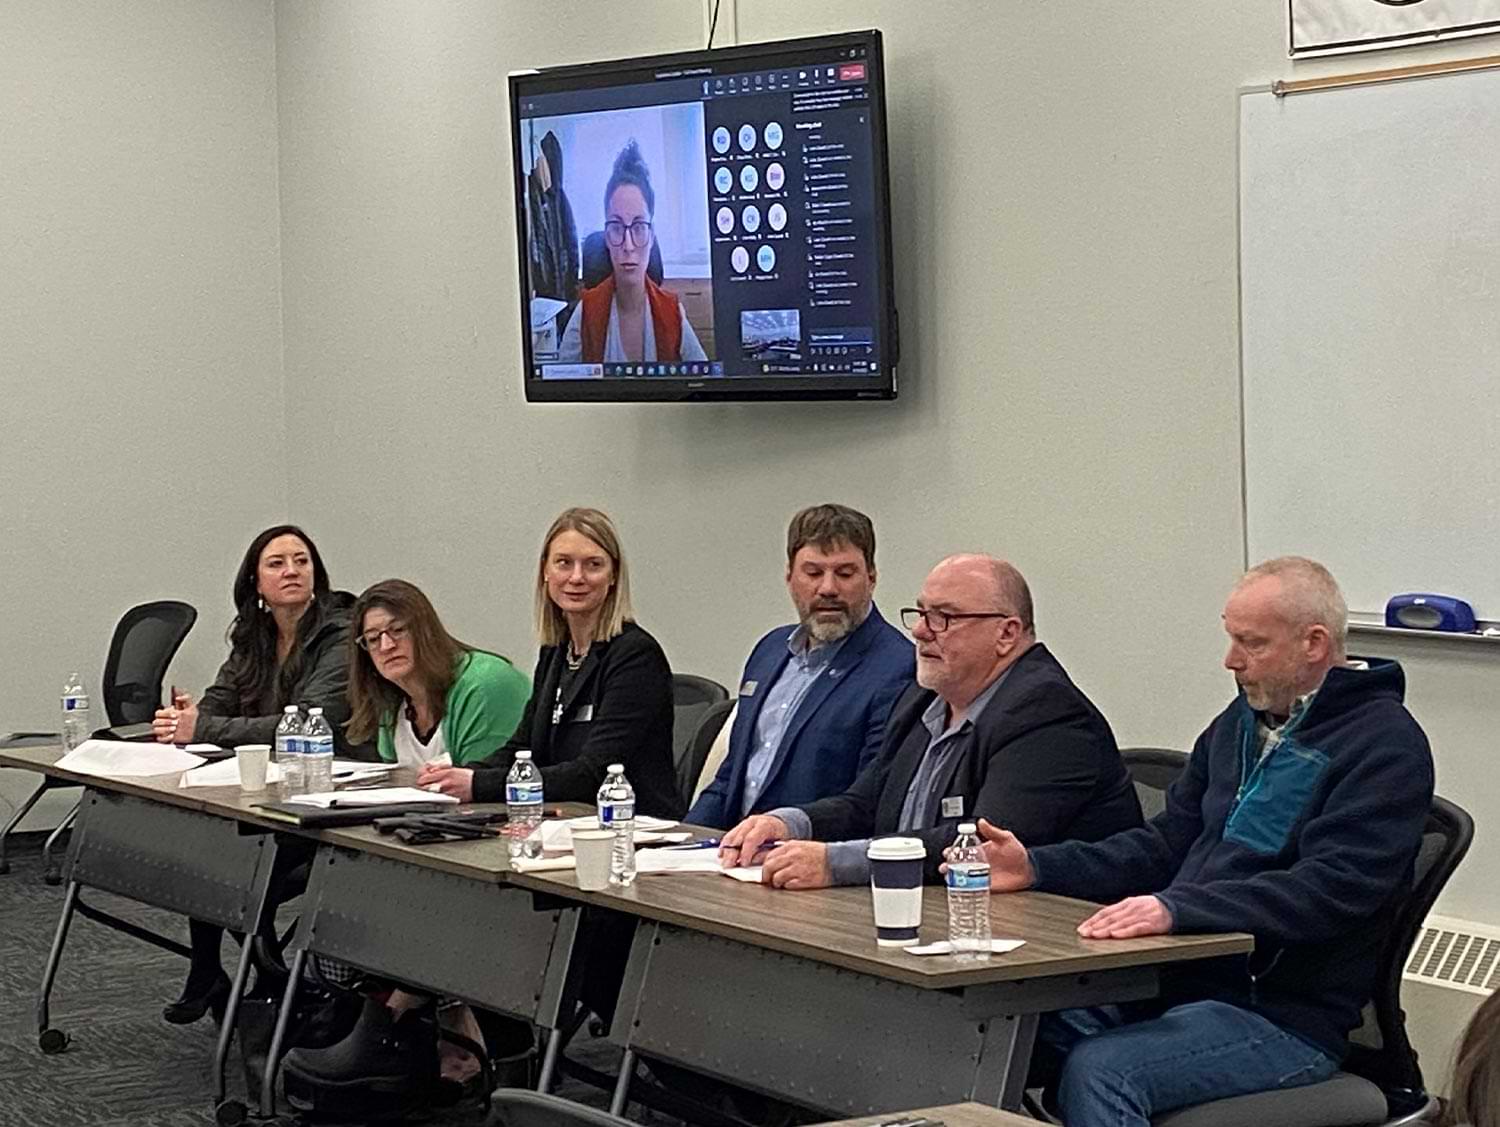 six people sit at a long table at the front of a conference room while a woman watches from a Zoom call from a television on the wall behind the long table